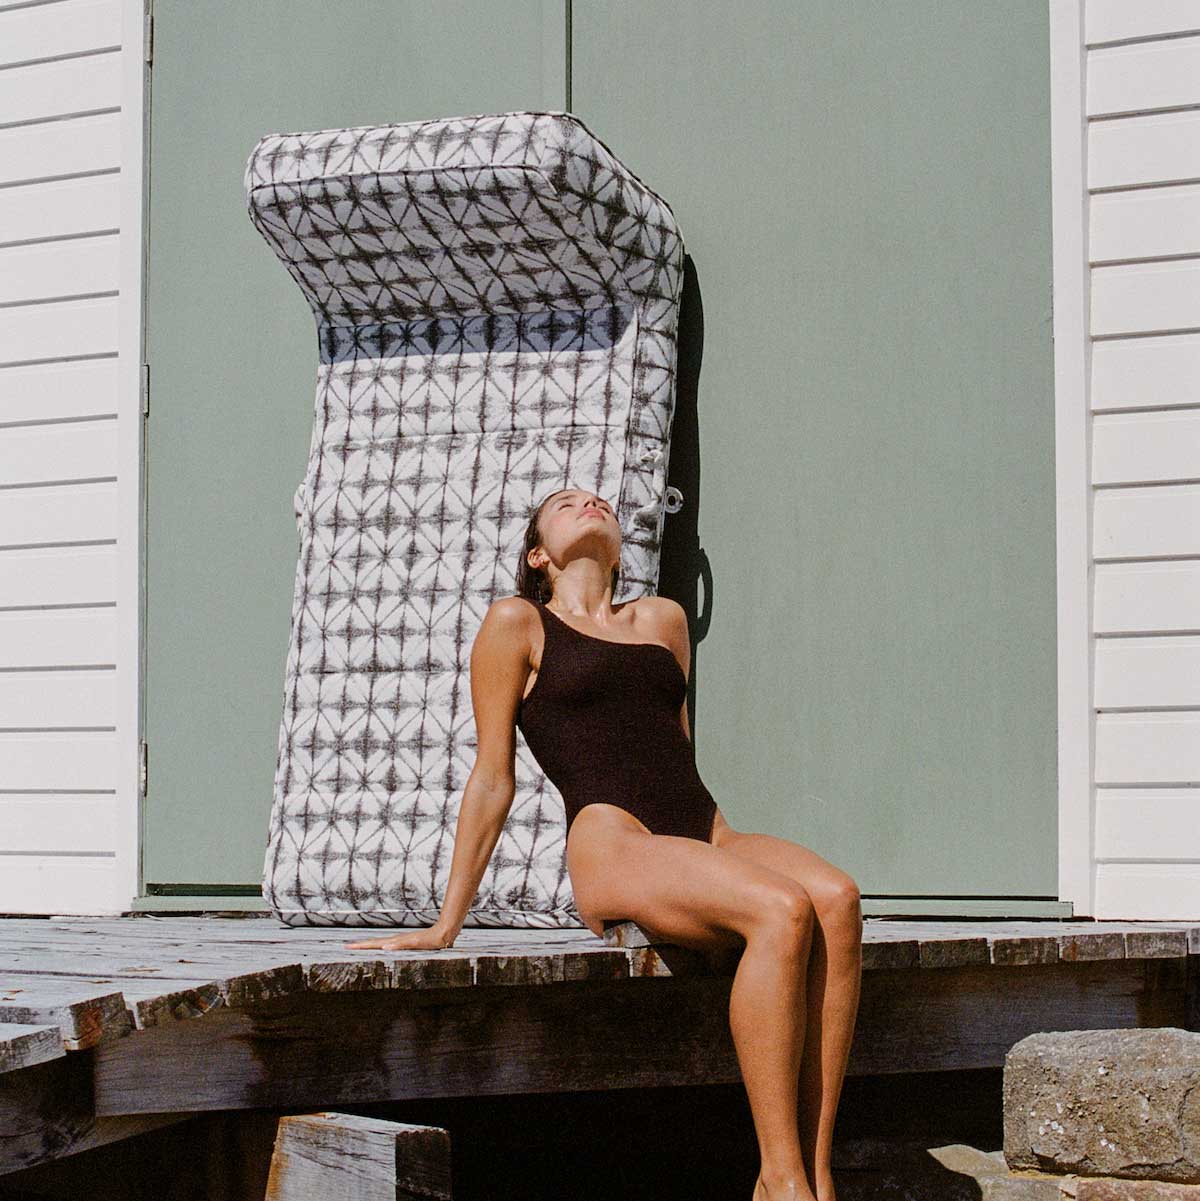 A women sitting on a wooden pier with a luxury pool floats for adults leaning against the wall behind her.